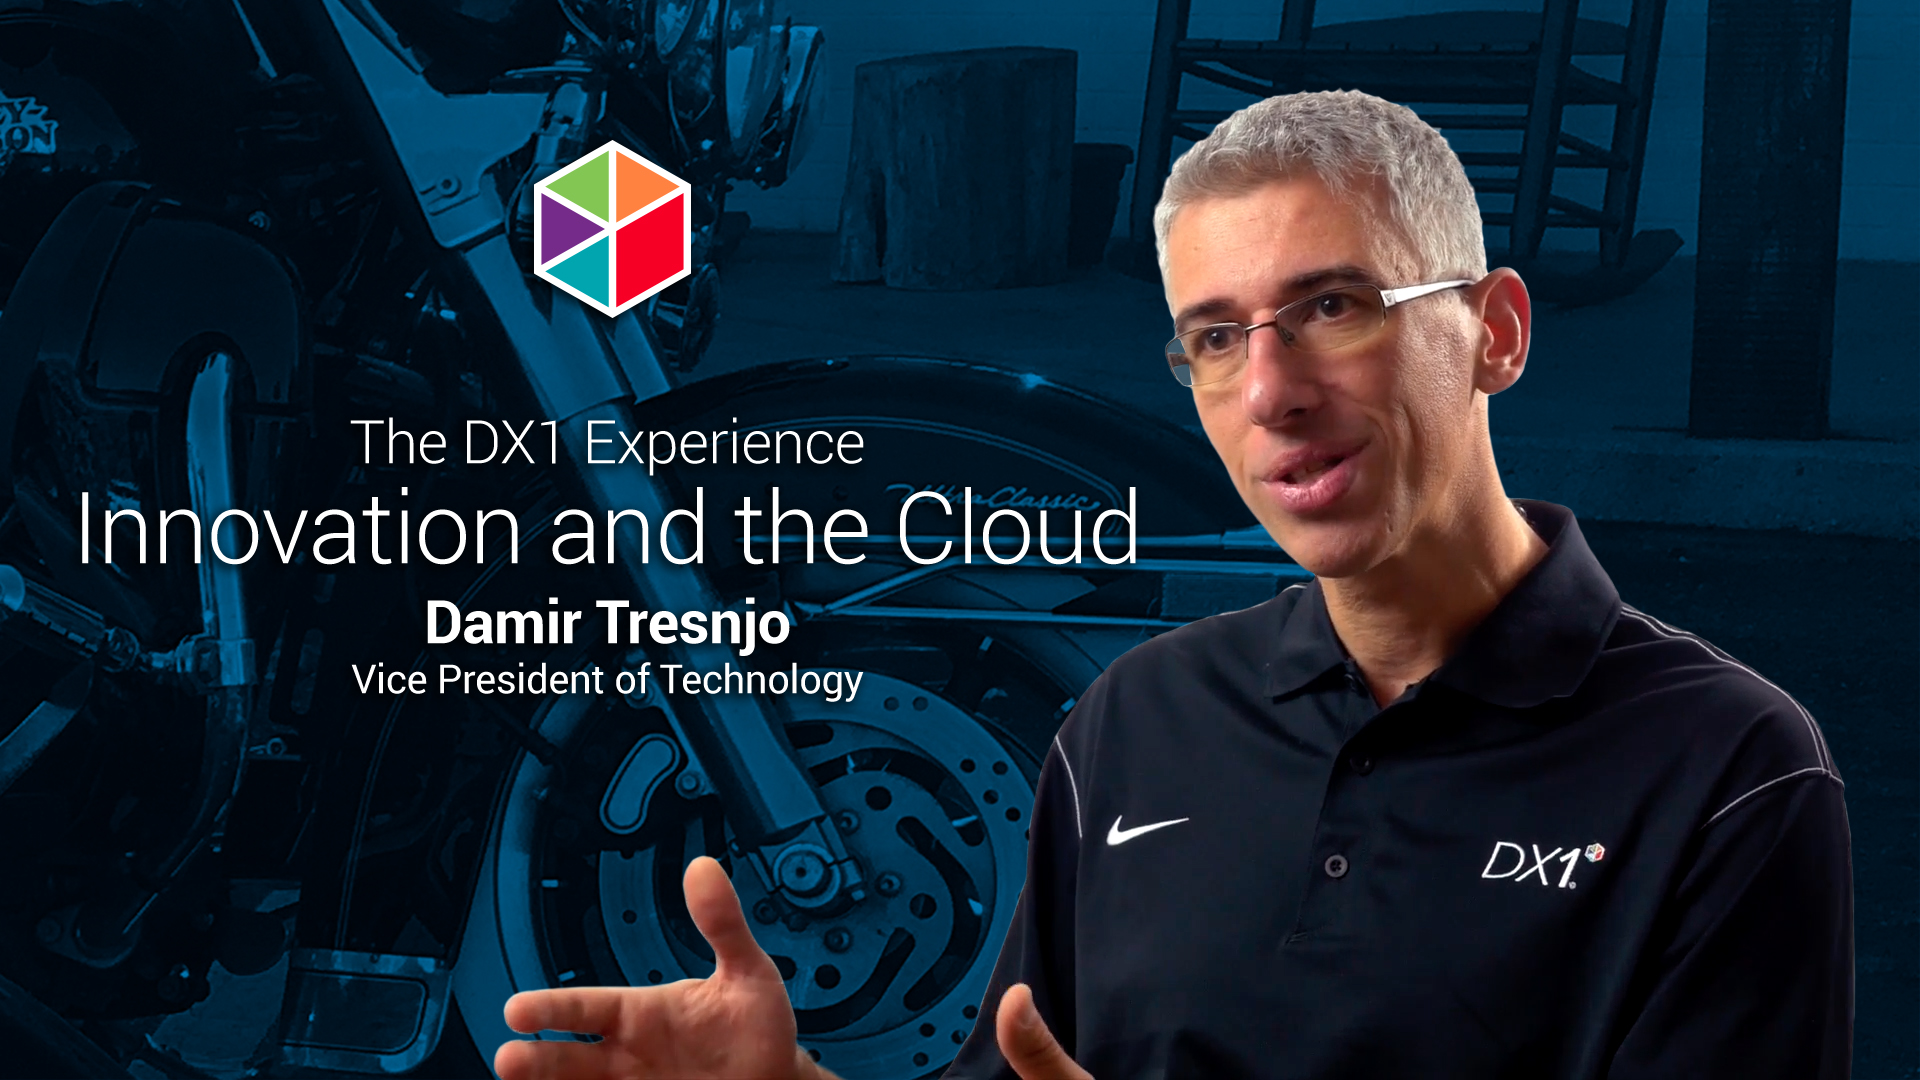 The DX1 Experience: Innovation and the Cloud